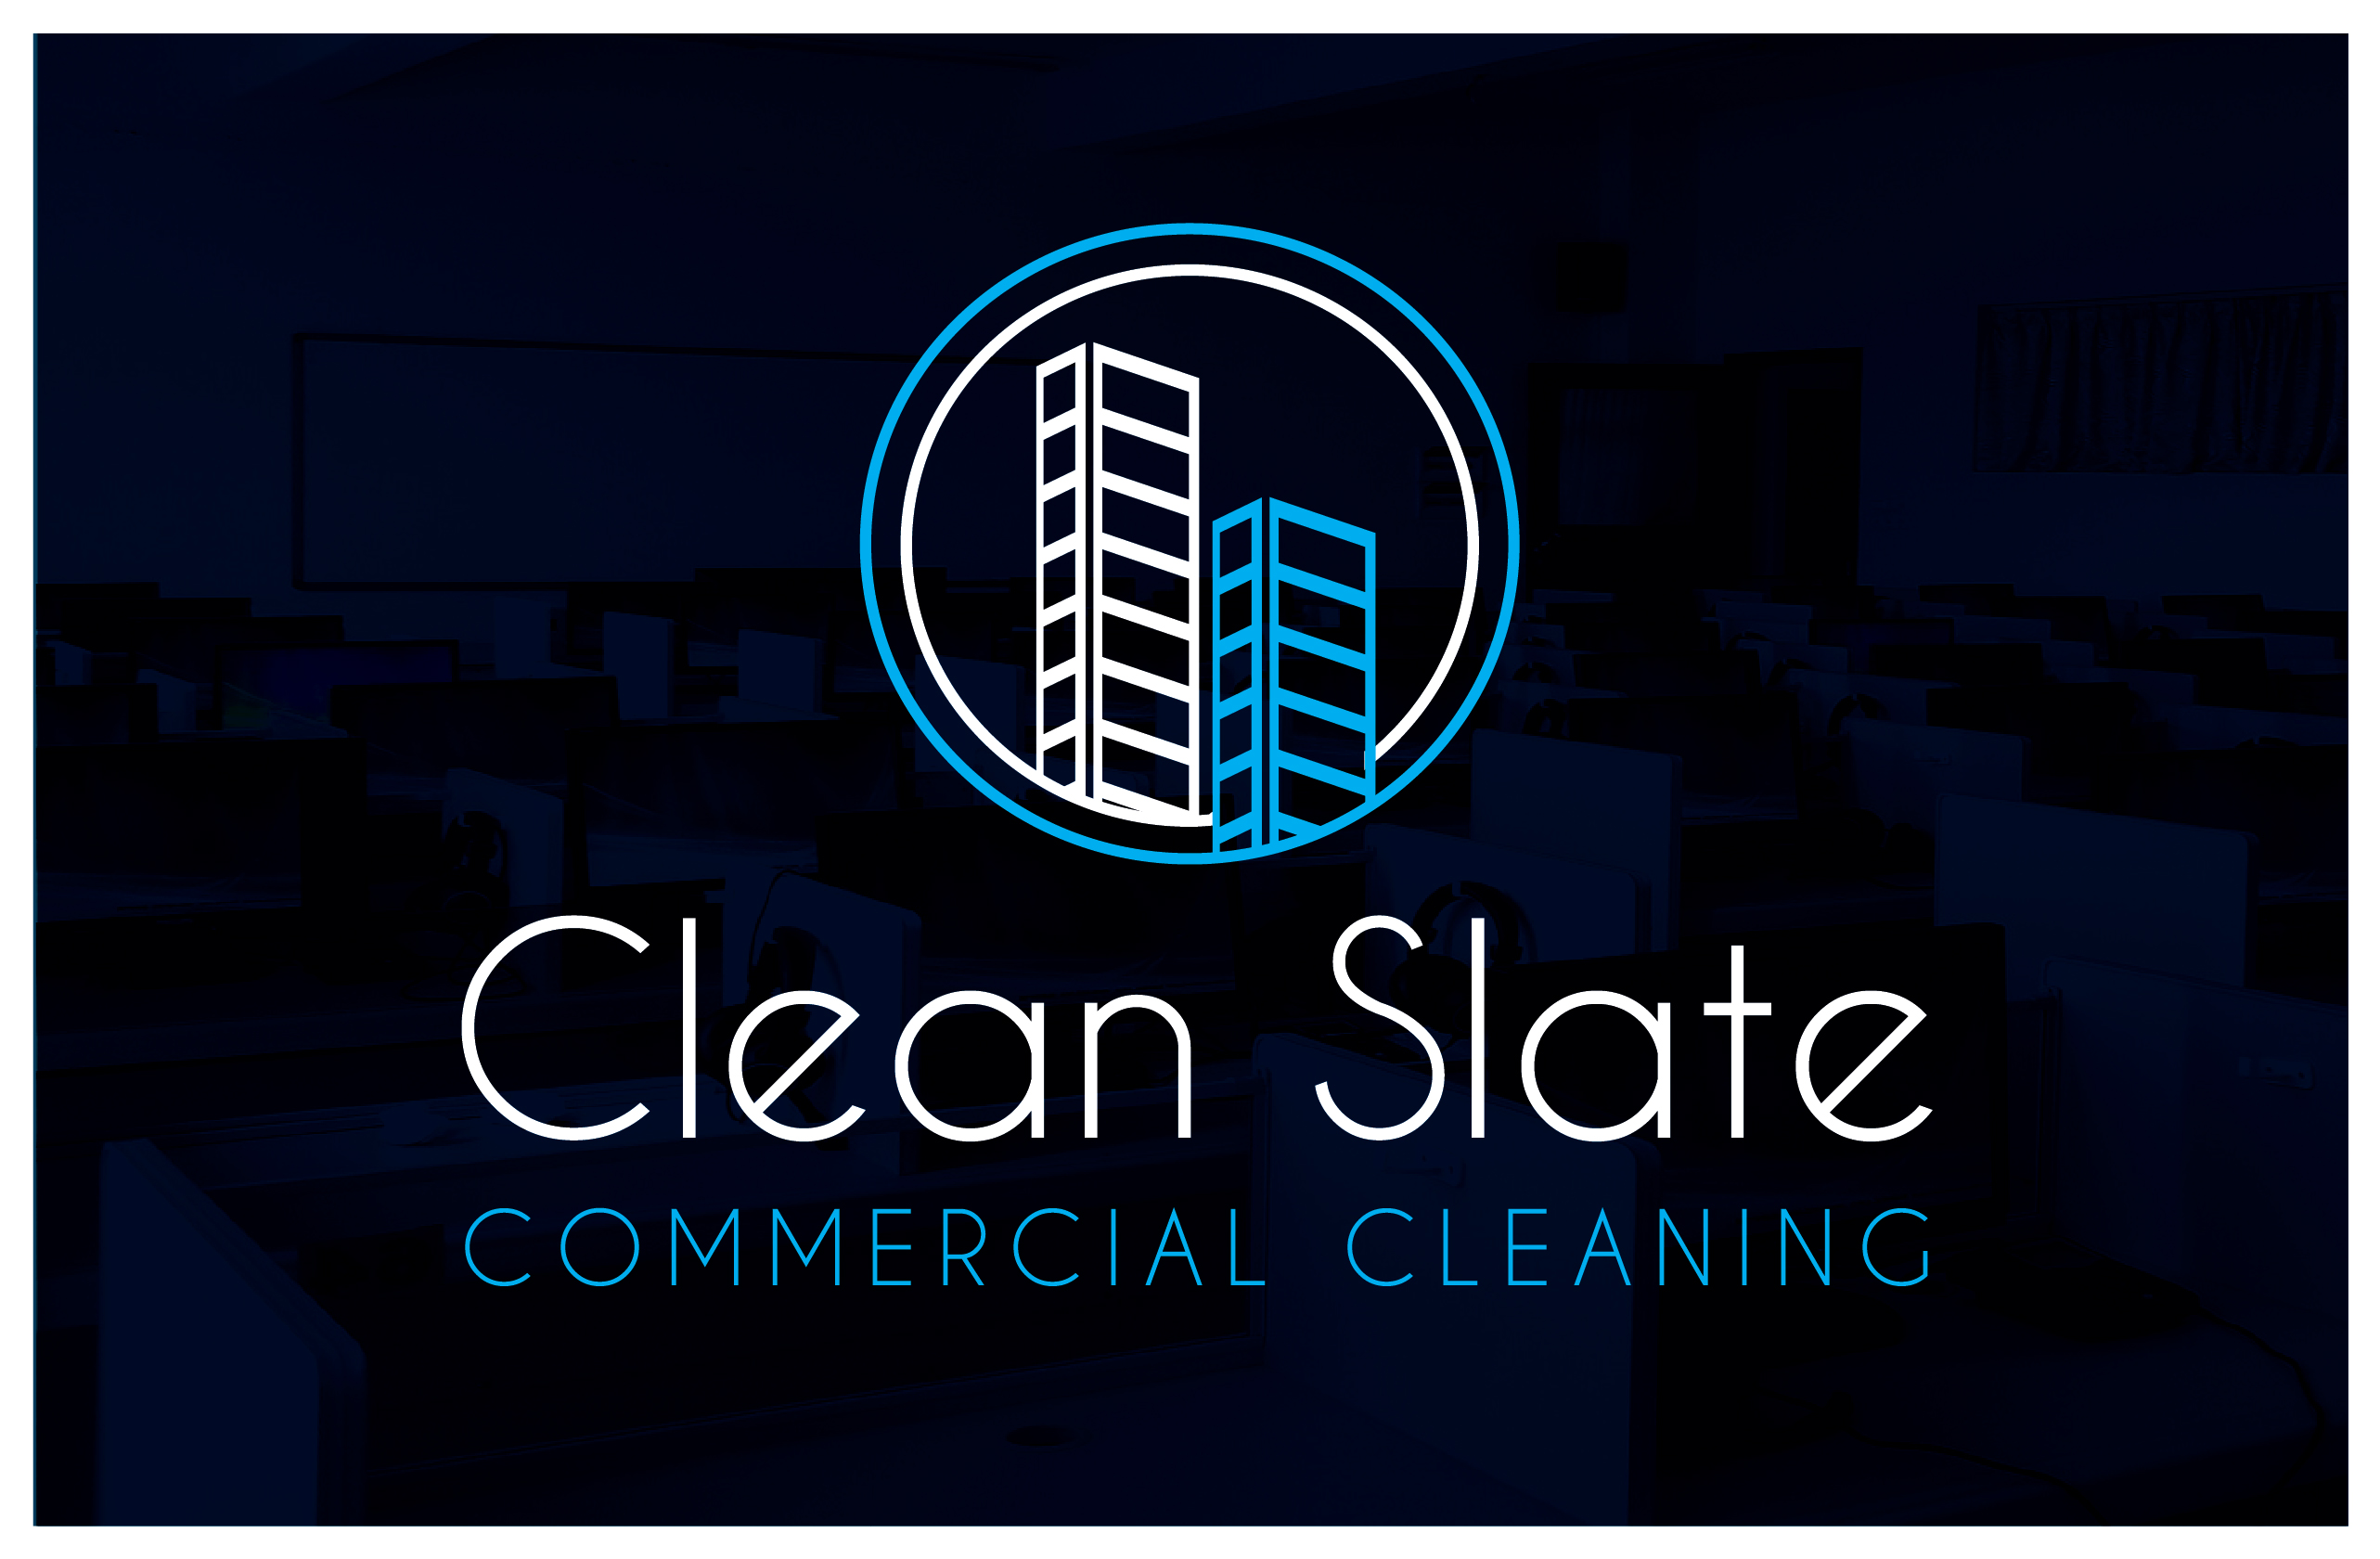 E&

Clean Slate

COMMERCIAL CLEANING